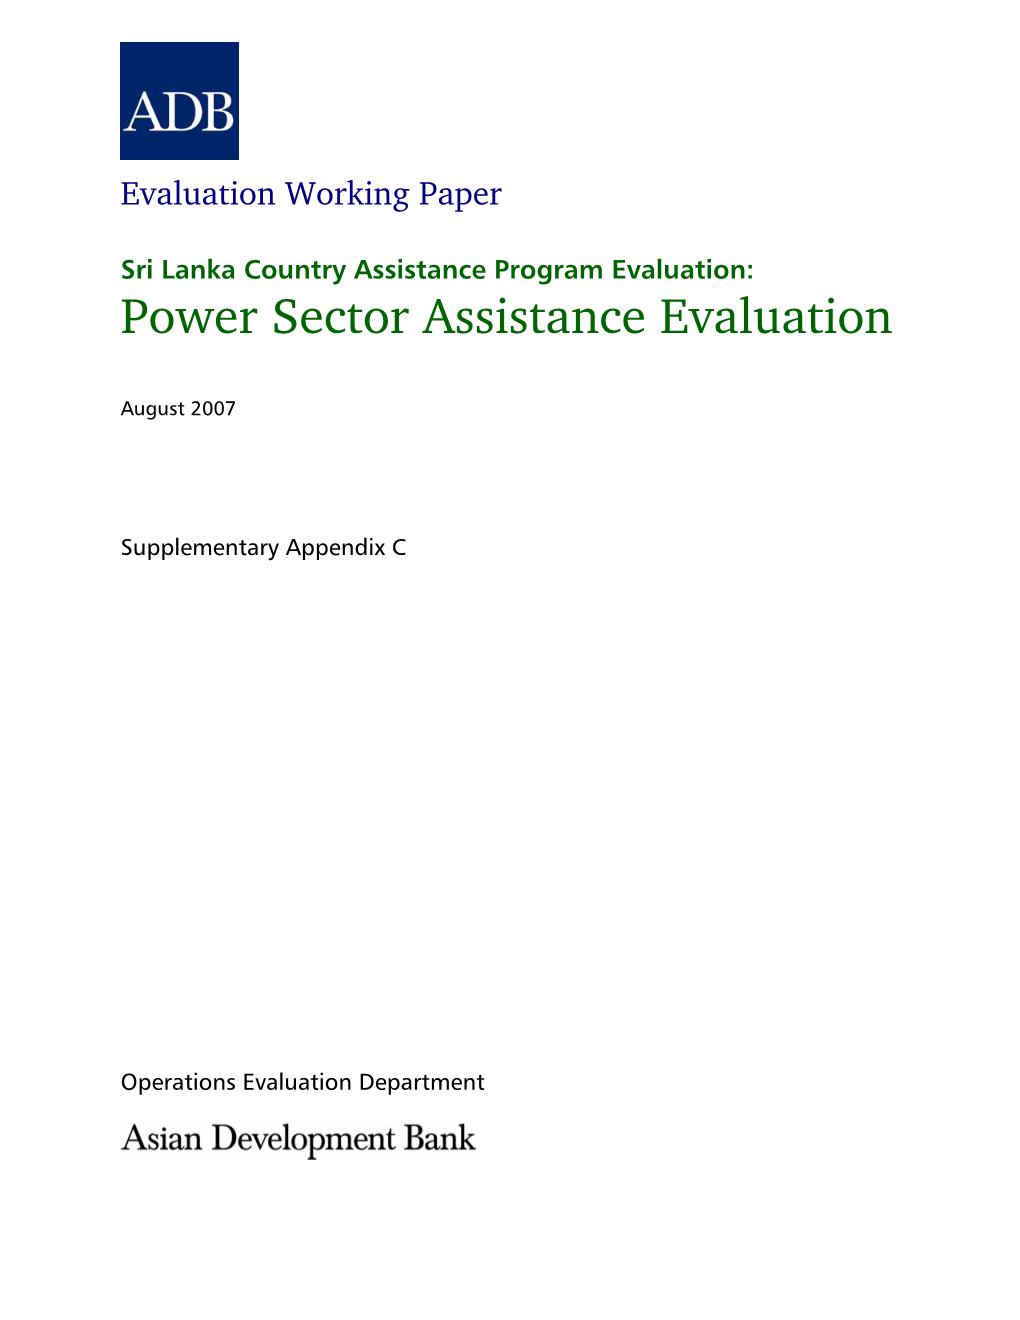 Evaluation of Power Sector Assistance in Sri Lanka